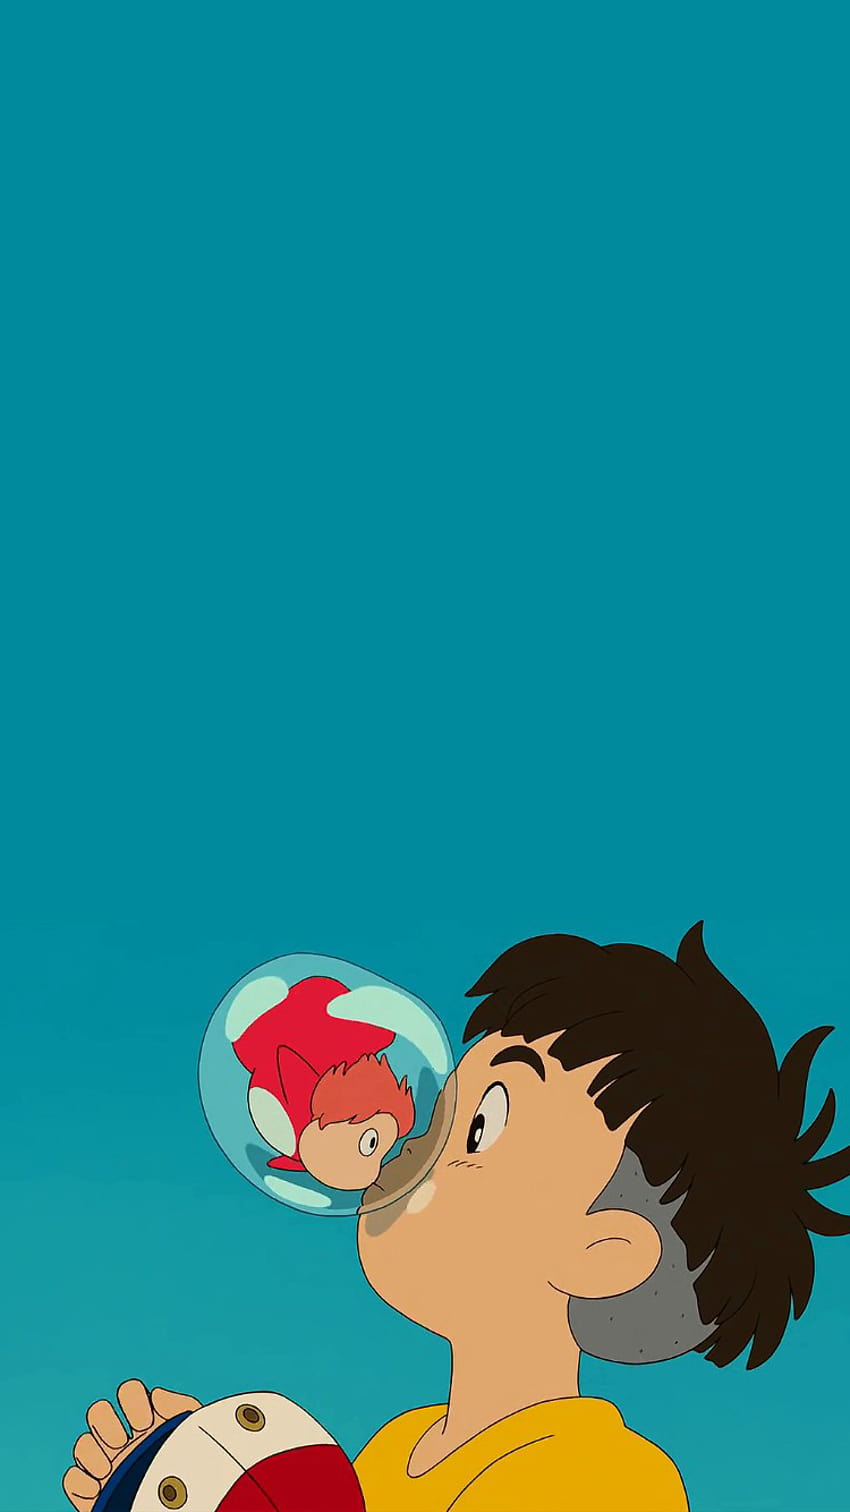 IPhone High Definition] Ponyo on the Cliff Top: Naver blog HD phone wallpaper